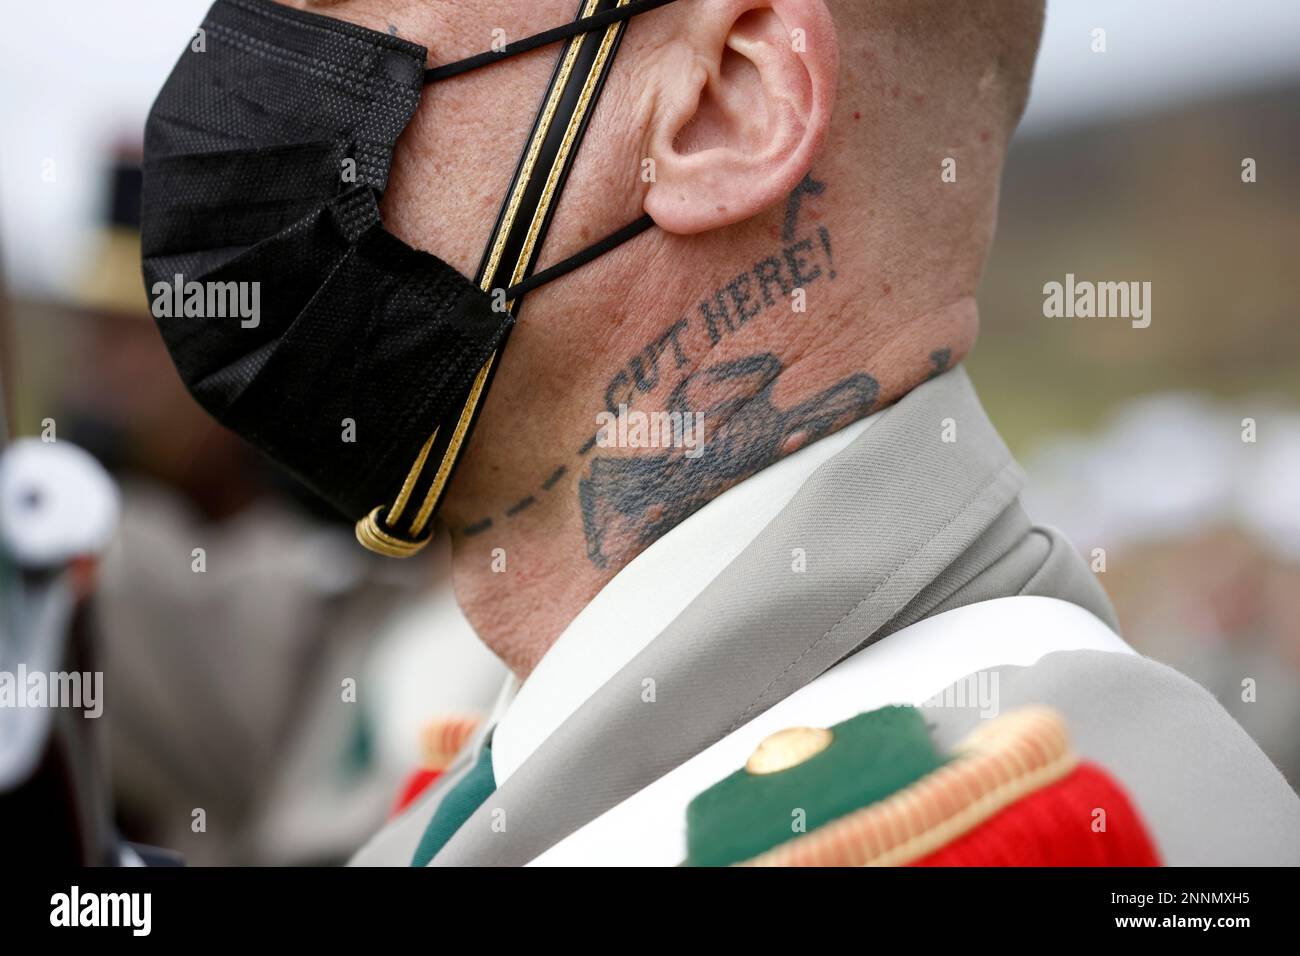 4031 French Foreign Legion Stock Photos HighRes Pictures and Images   Getty Images